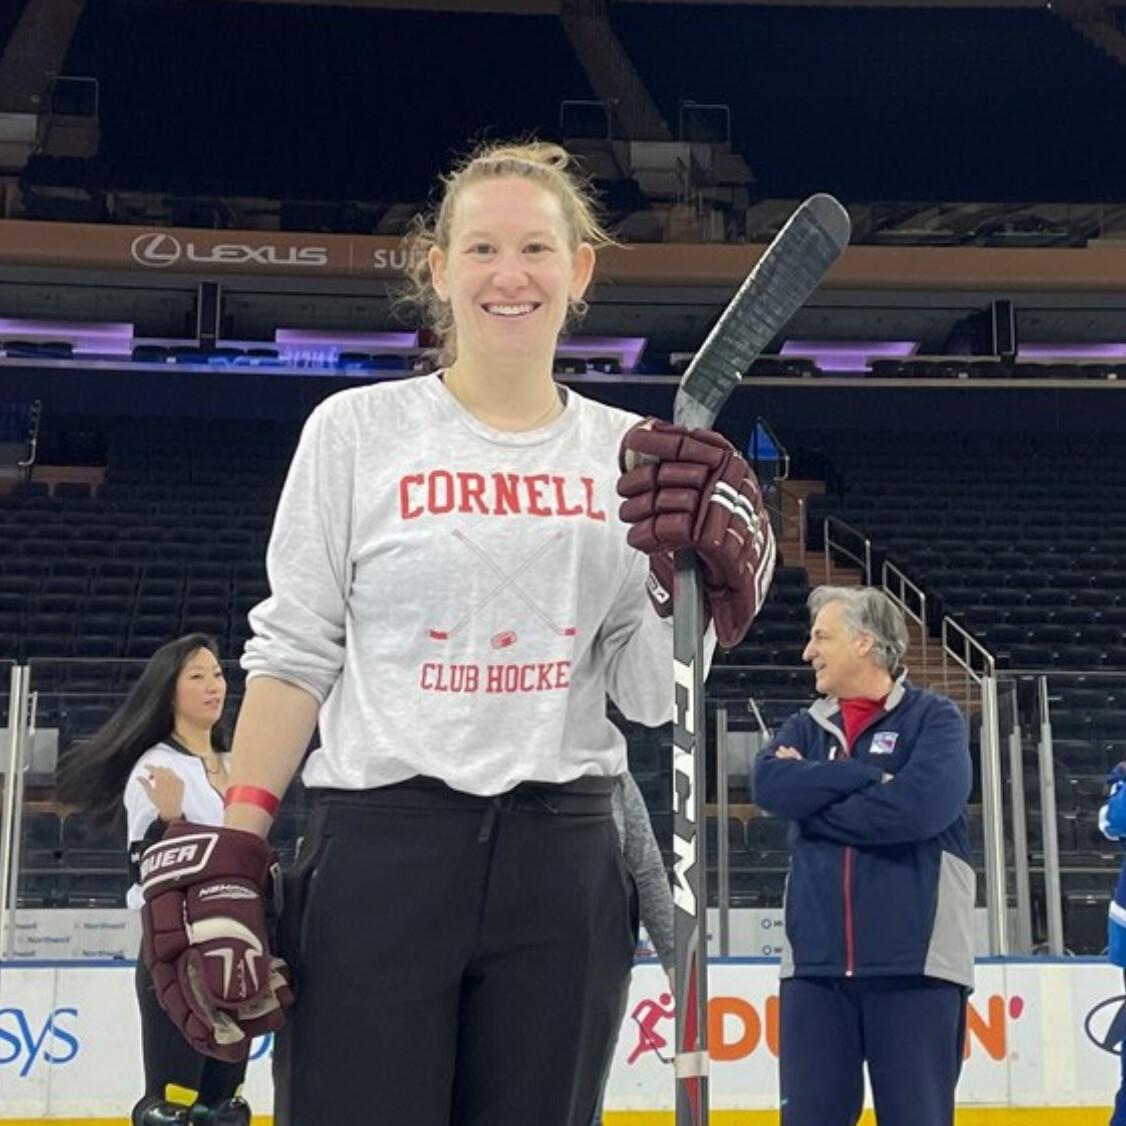 		Person wearing hockey gloves and a Cornell t-shirt, carrying a hockey stick and smiling
	